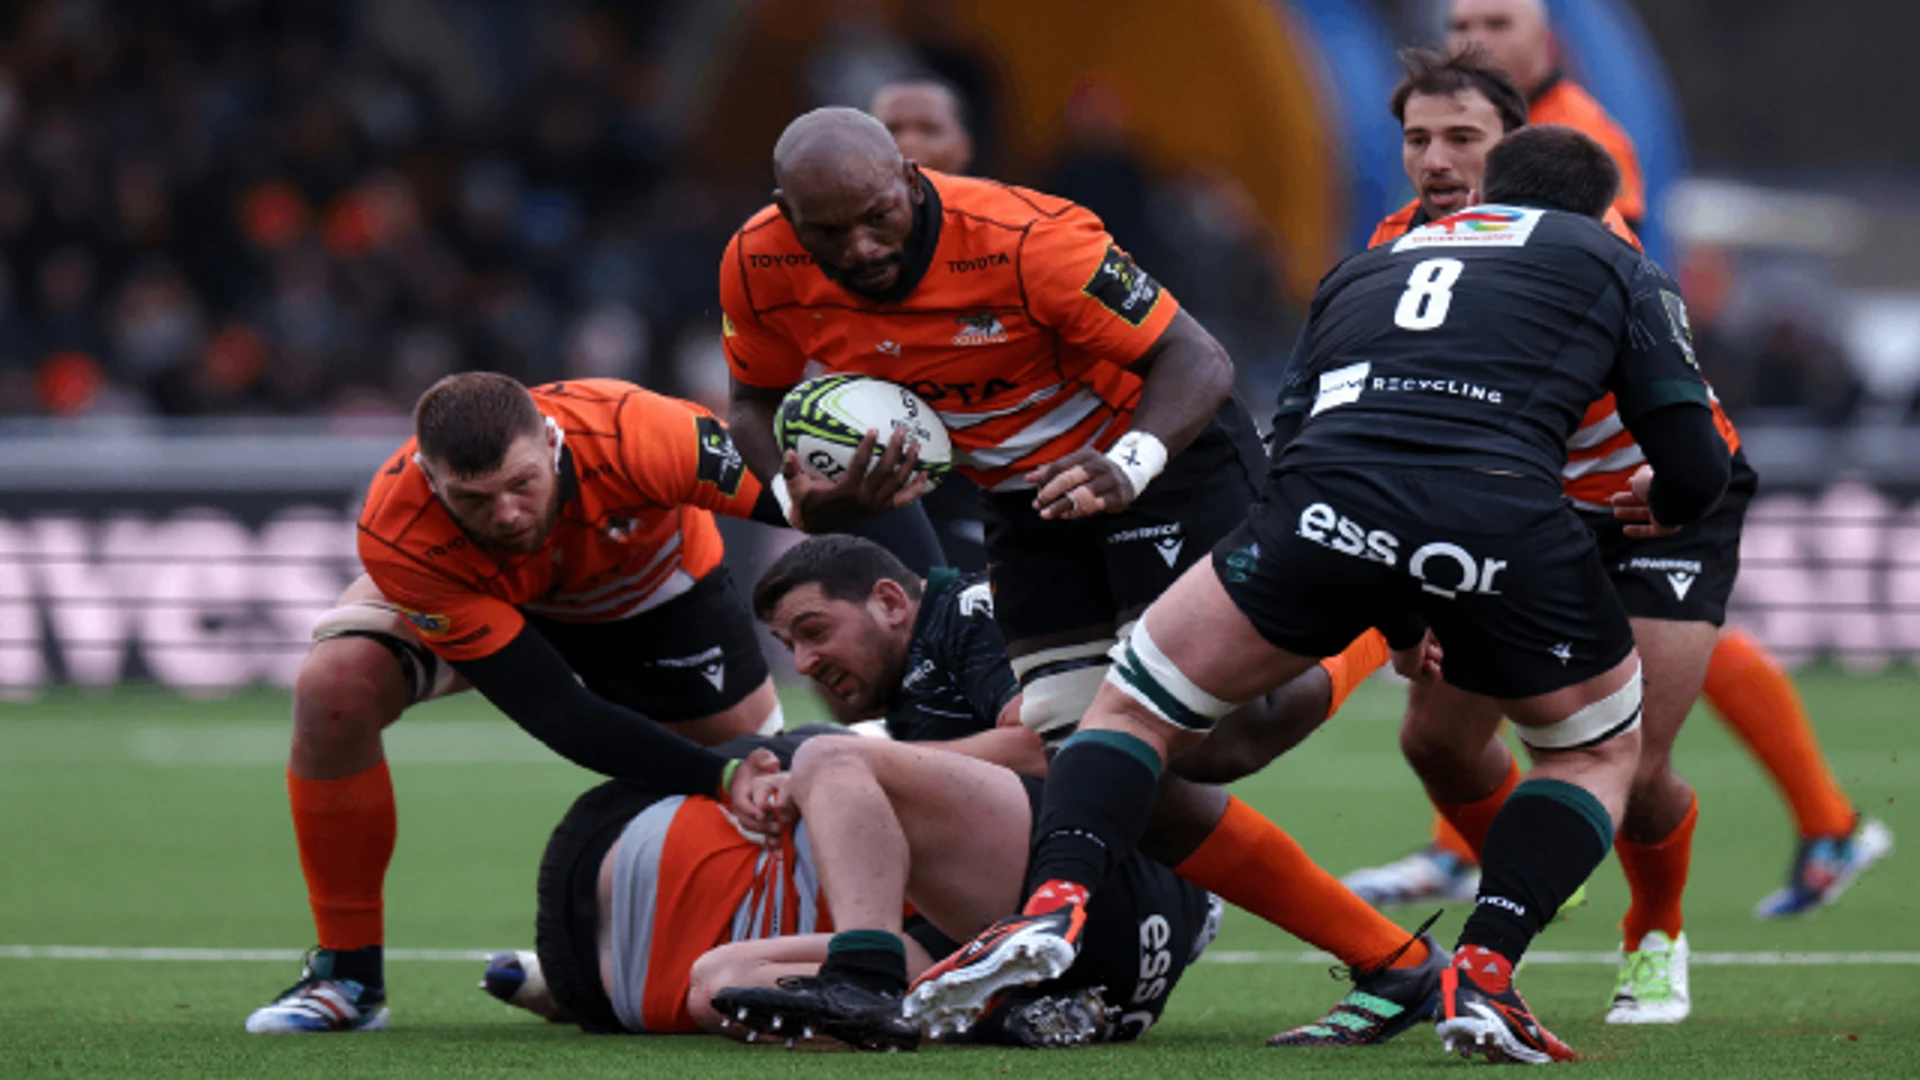 Toyota Cheetahs v Section Paloise | Match Highlights | European Rugby Challenge Cup